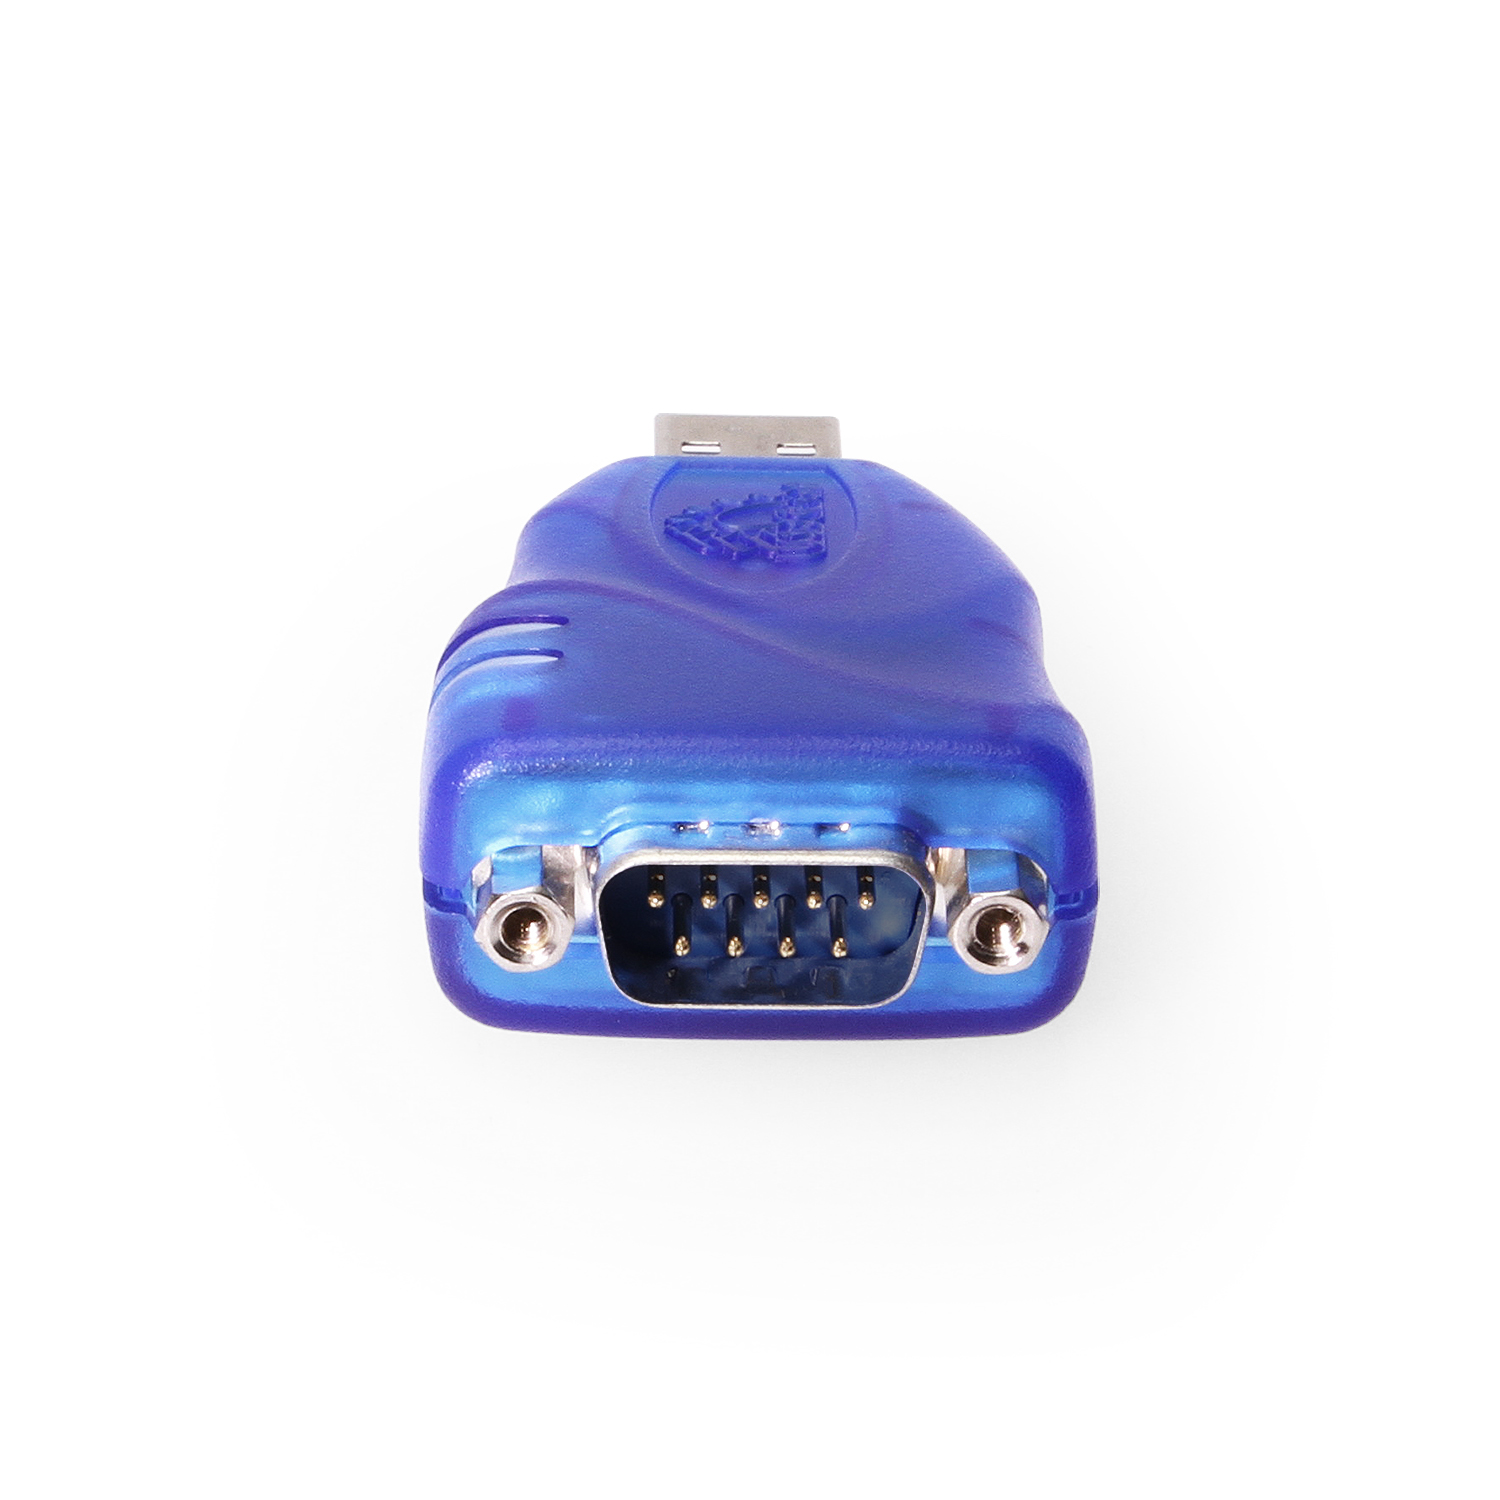 RS232 Serial Port DB 9-Pin To USB Adapter Dongle Cable 